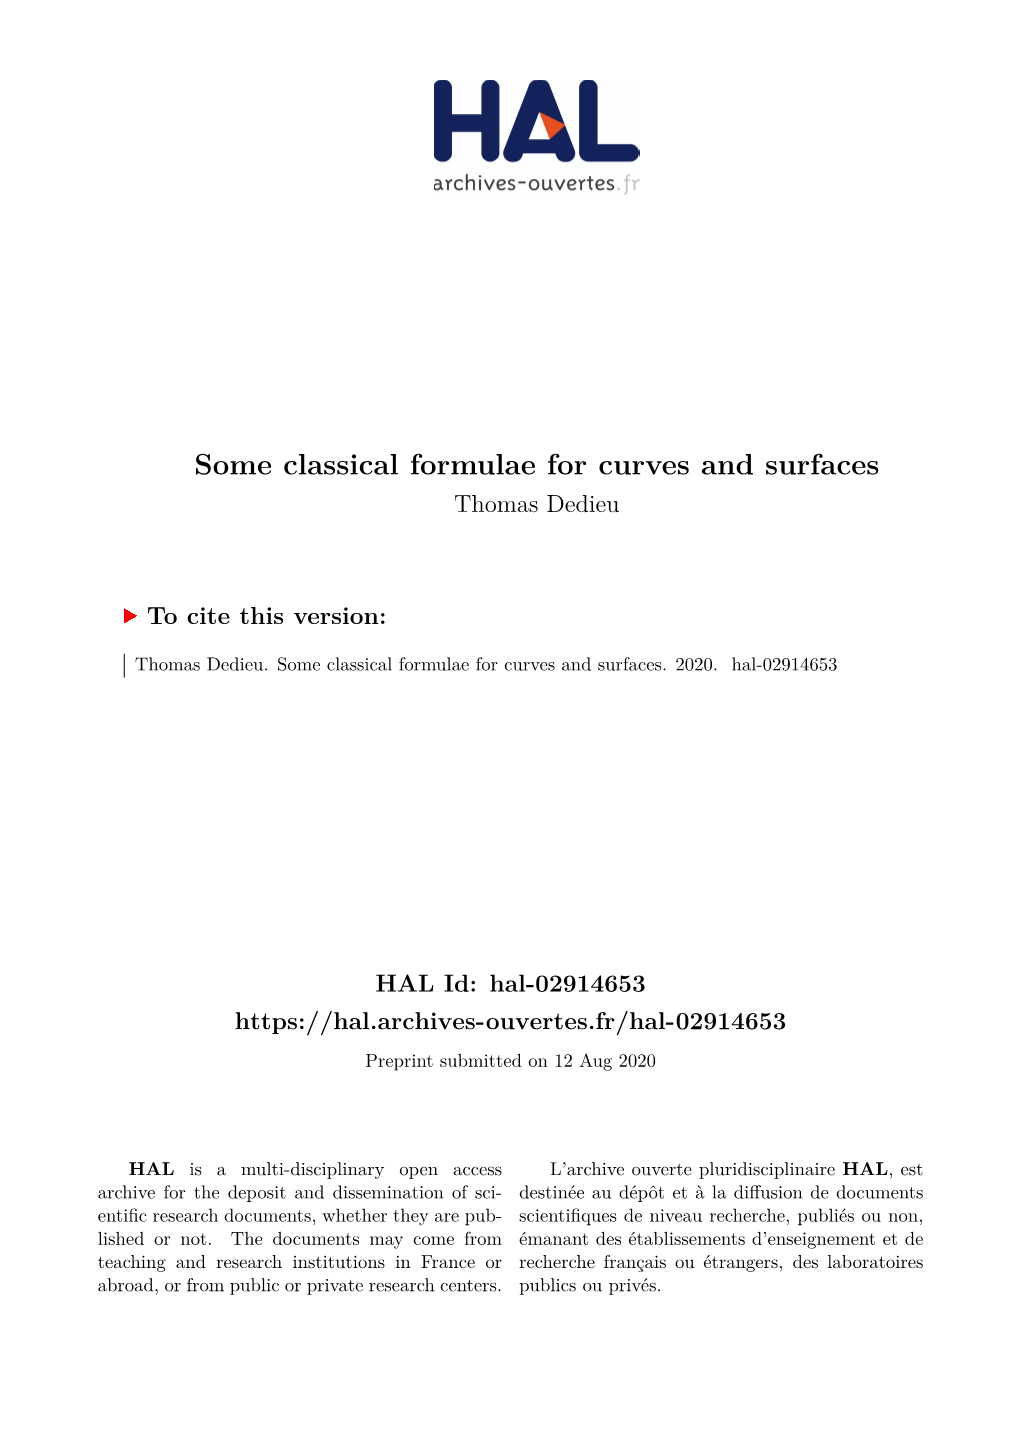 Some Classical Formulae for Curves and Surfaces Thomas Dedieu